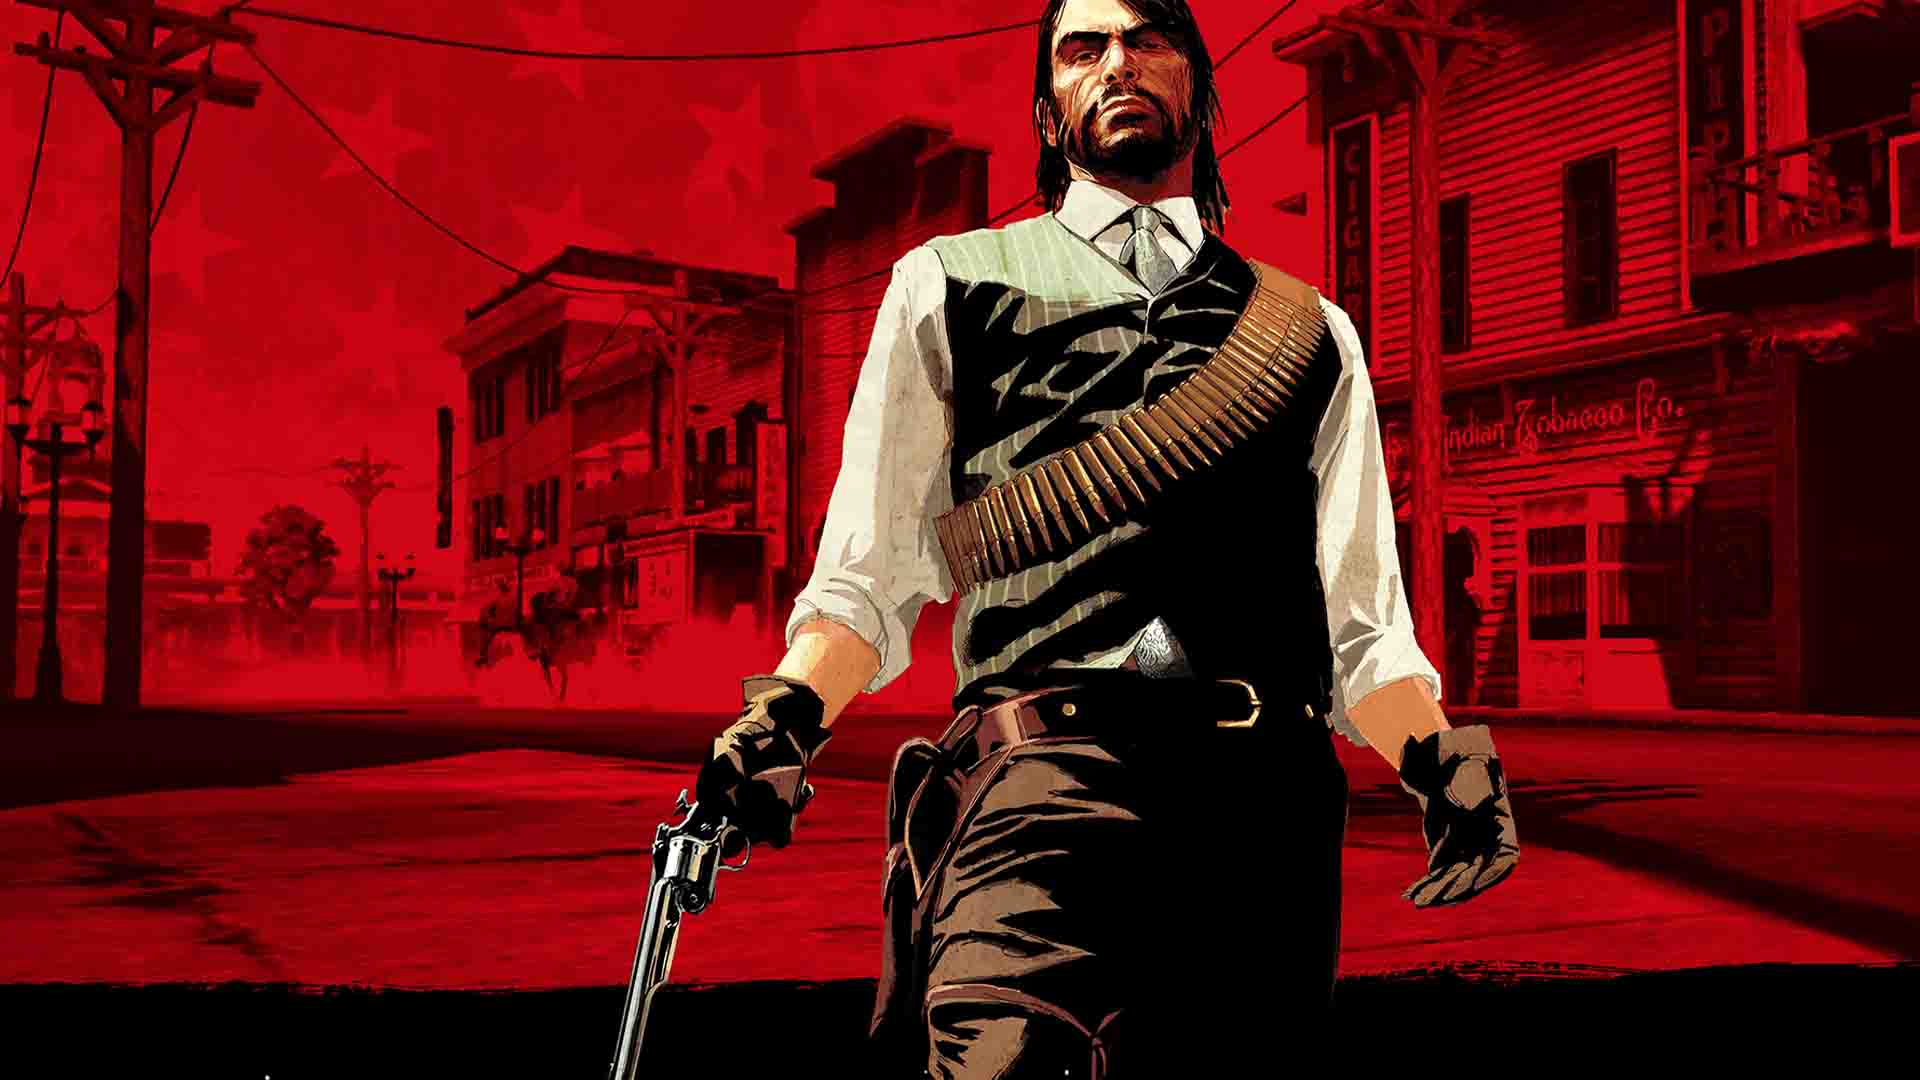 Red Dead Redemption' is coming to PlayStation 4 December 6th